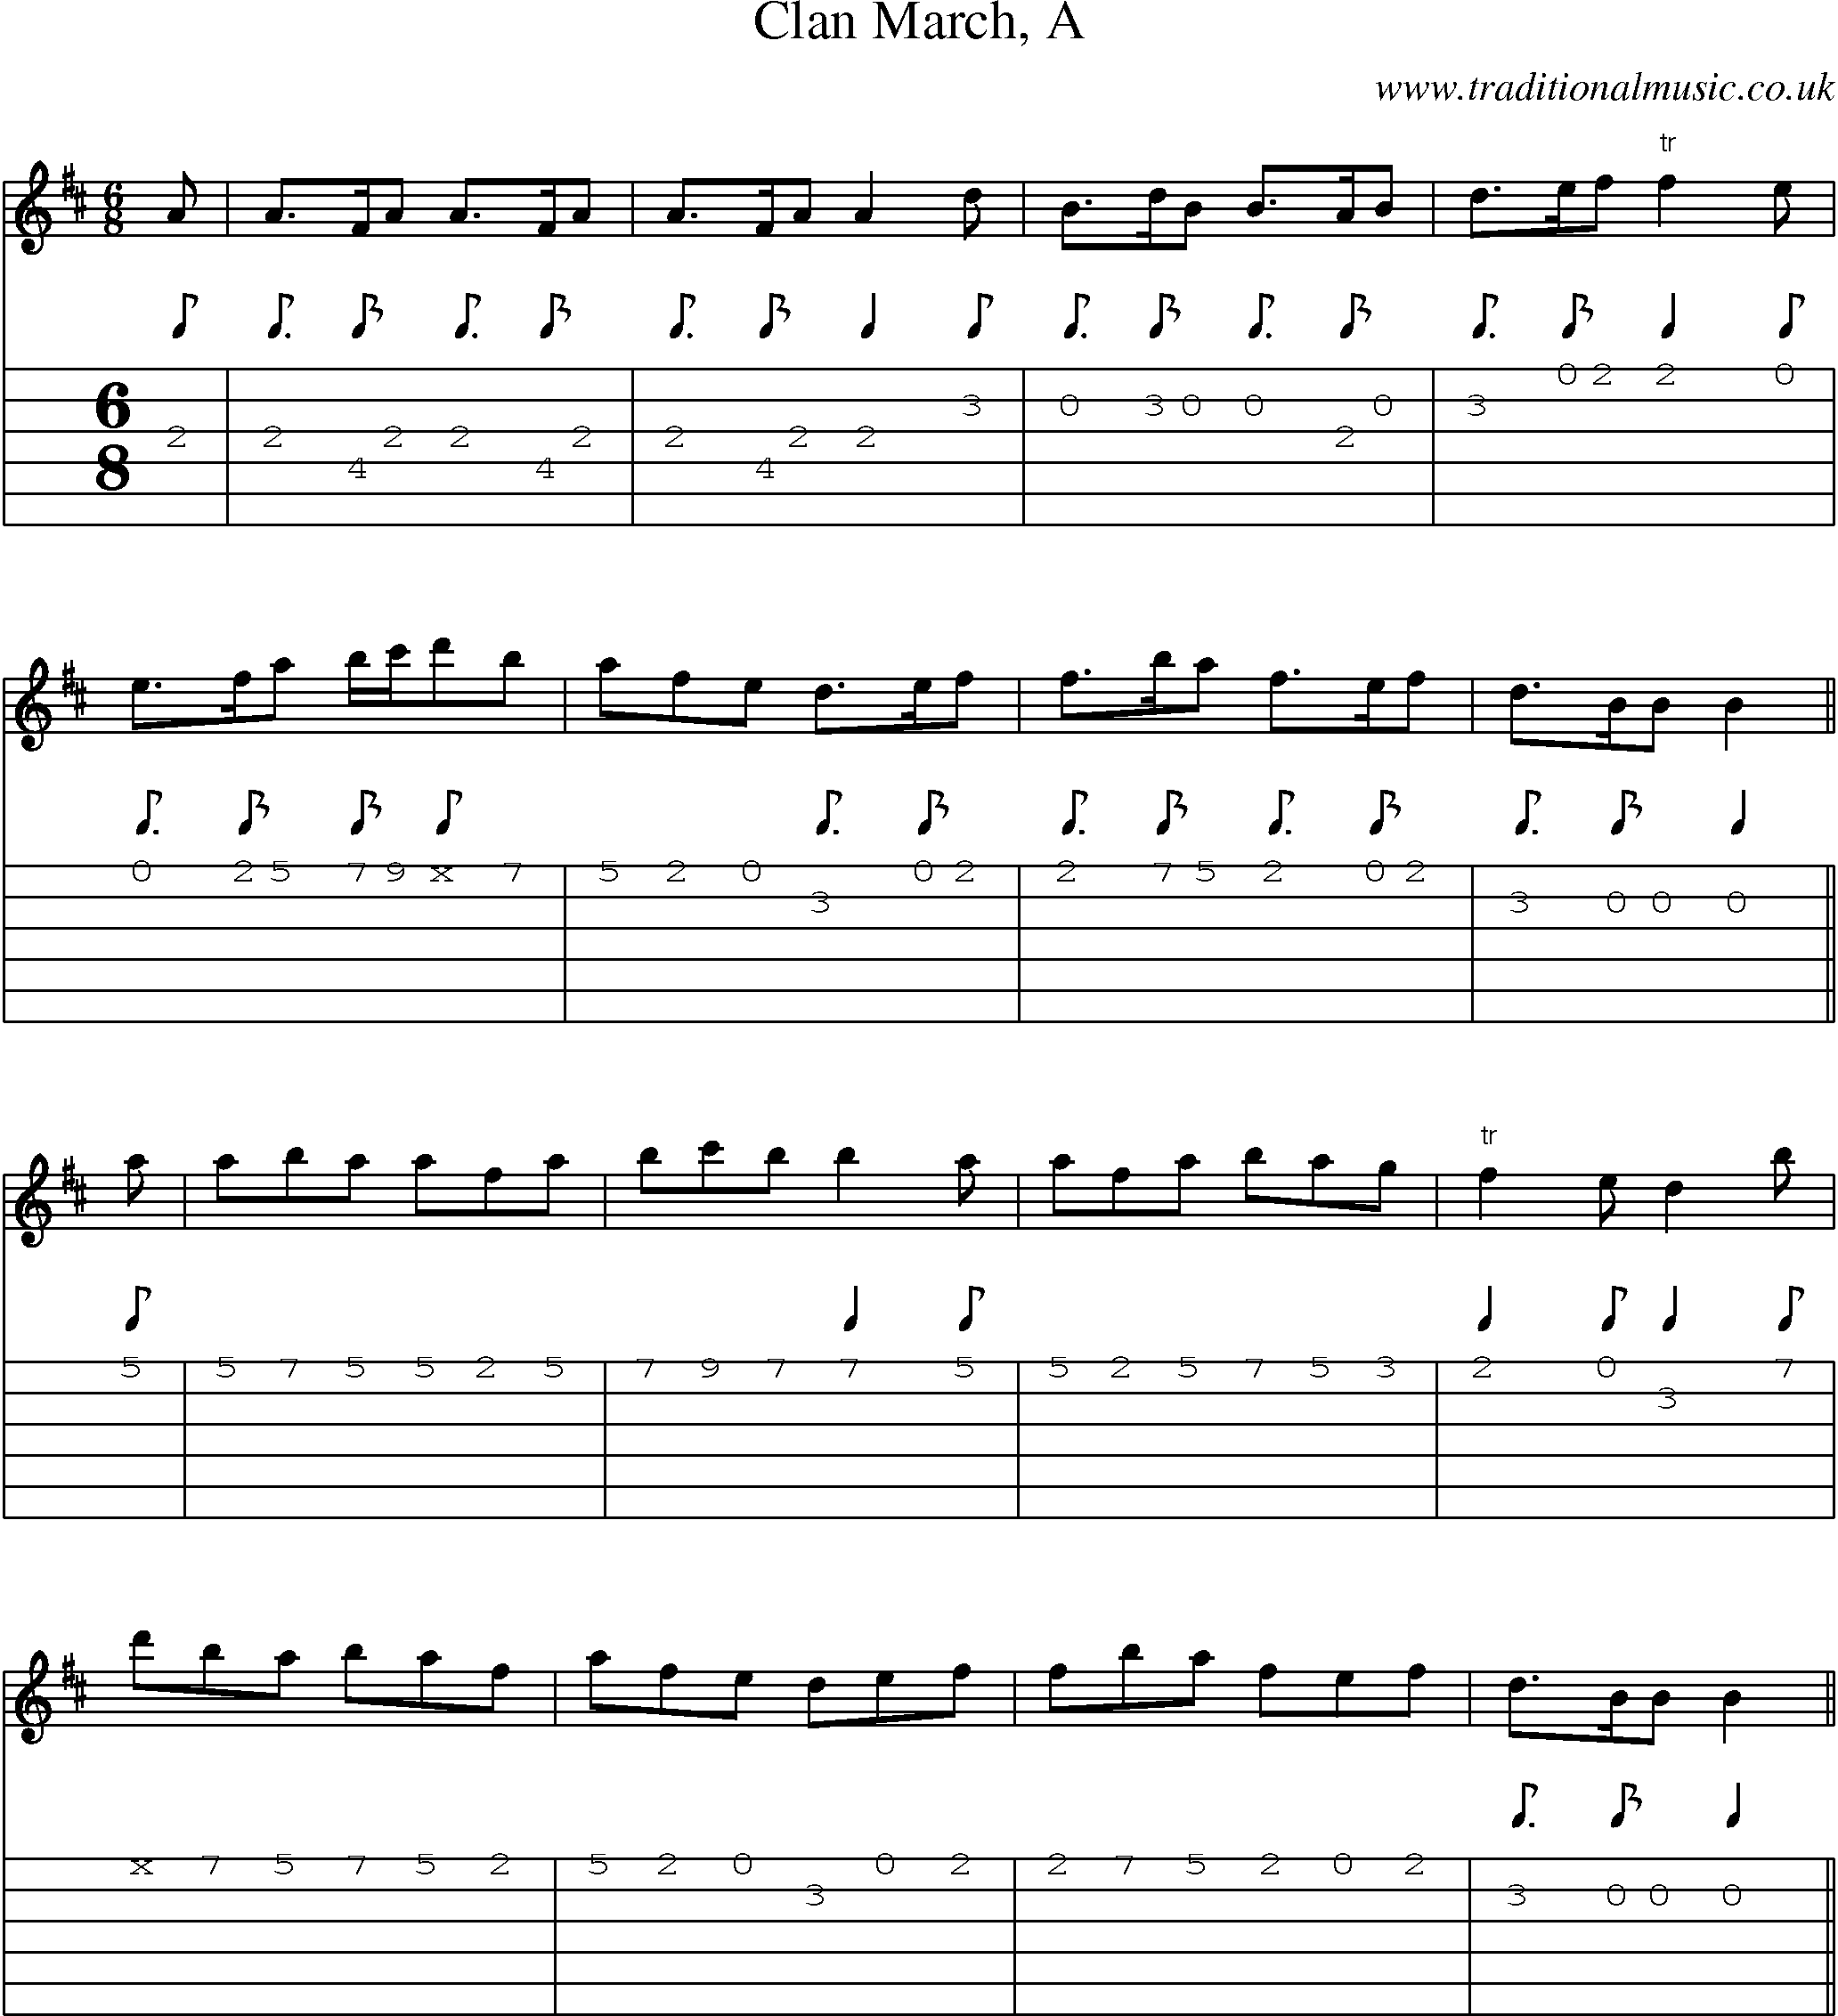 Music Score and Guitar Tabs for Clan March A